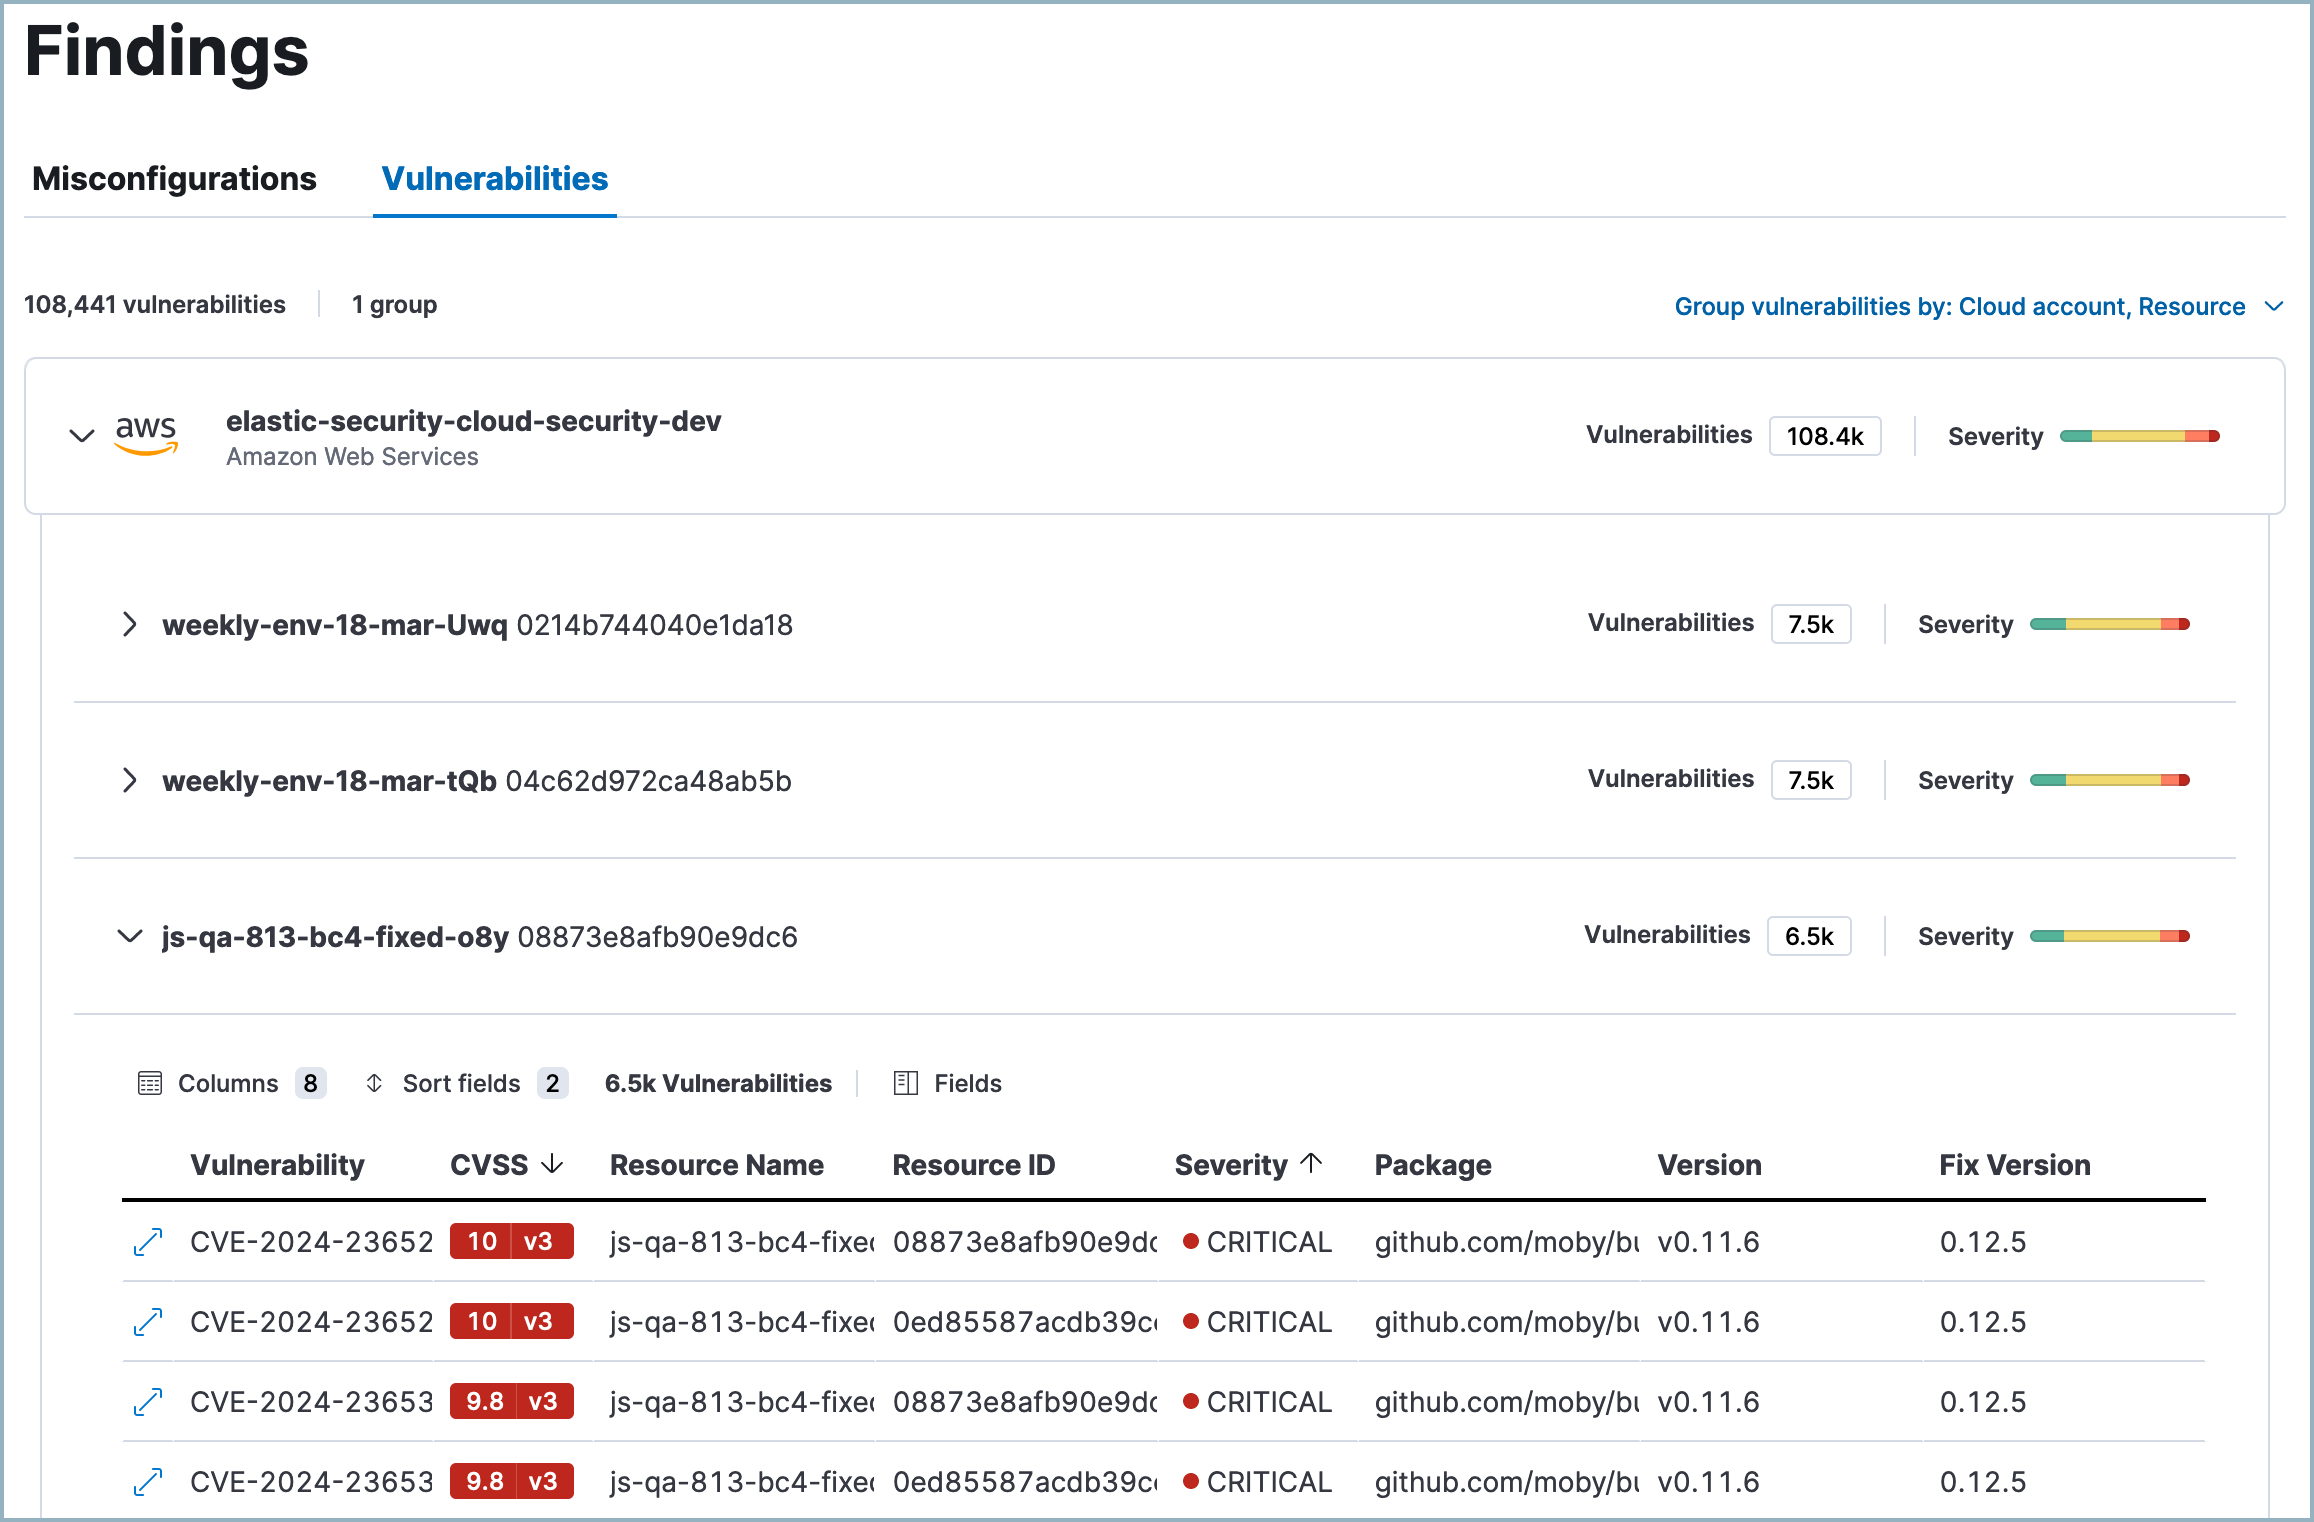 The Vulnerabilities tab of the Findings page